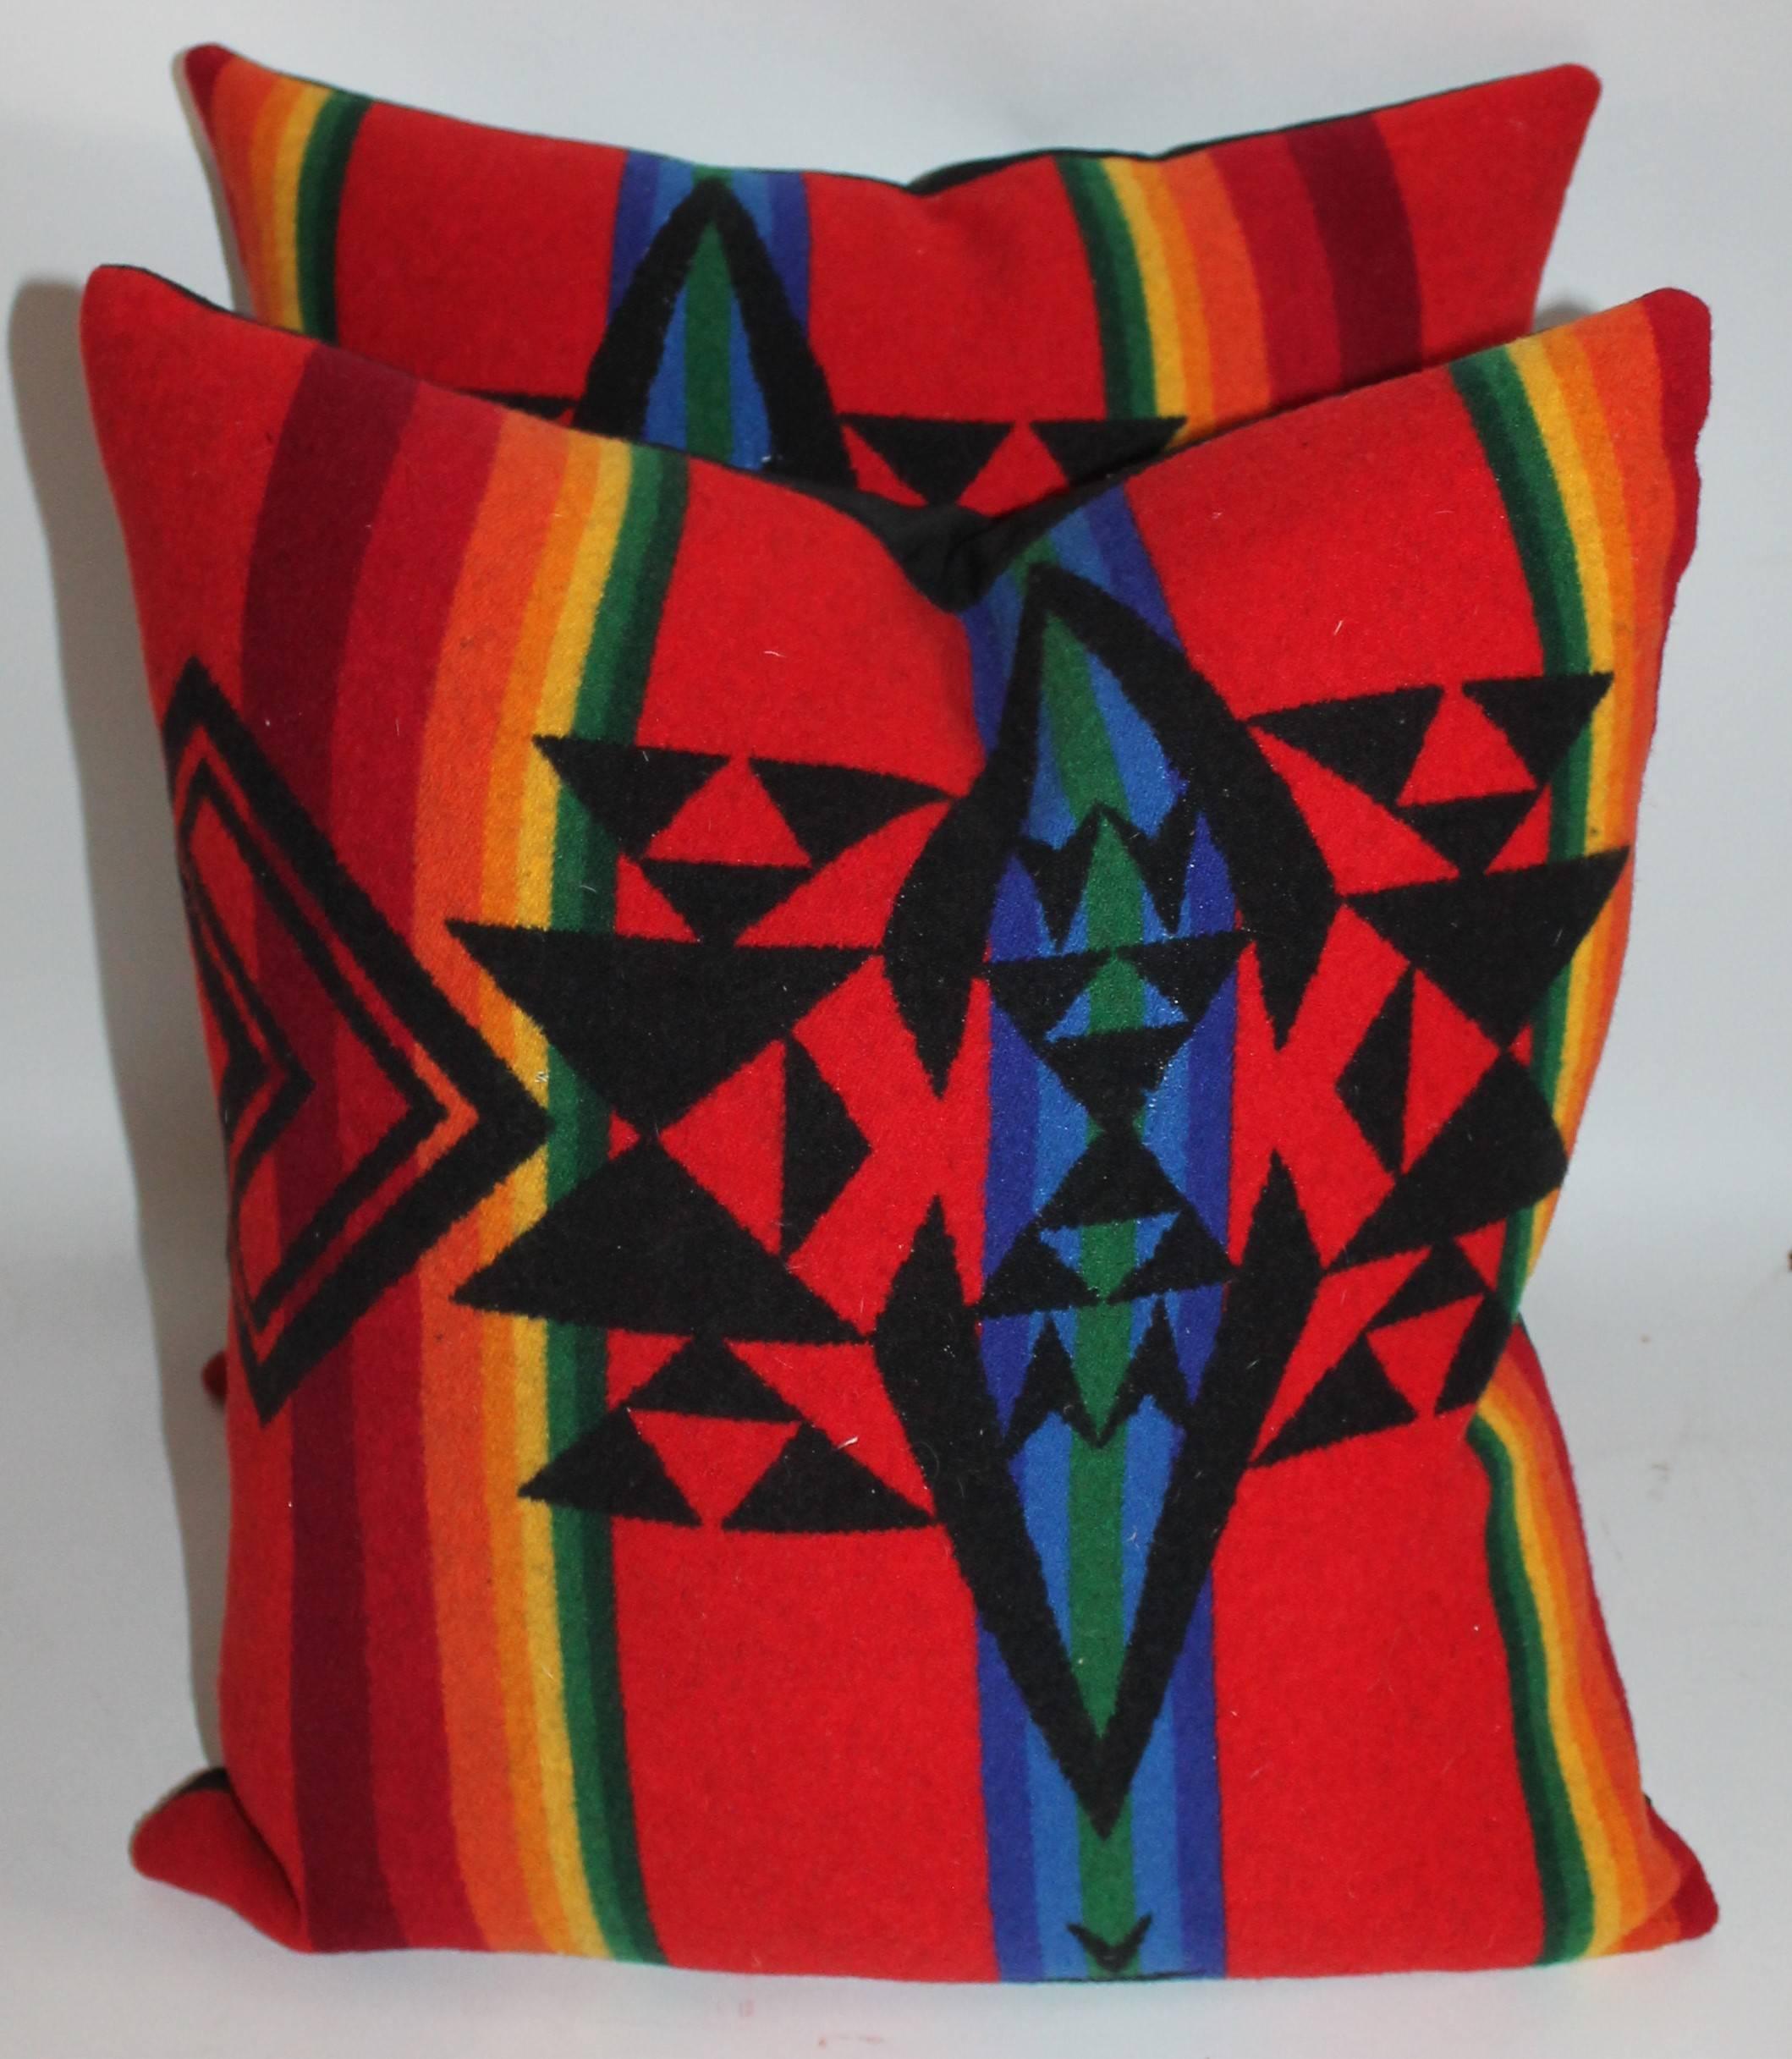 Newly made pillows from vintage Pendleton Indian design camp blanket. Black linen backing.